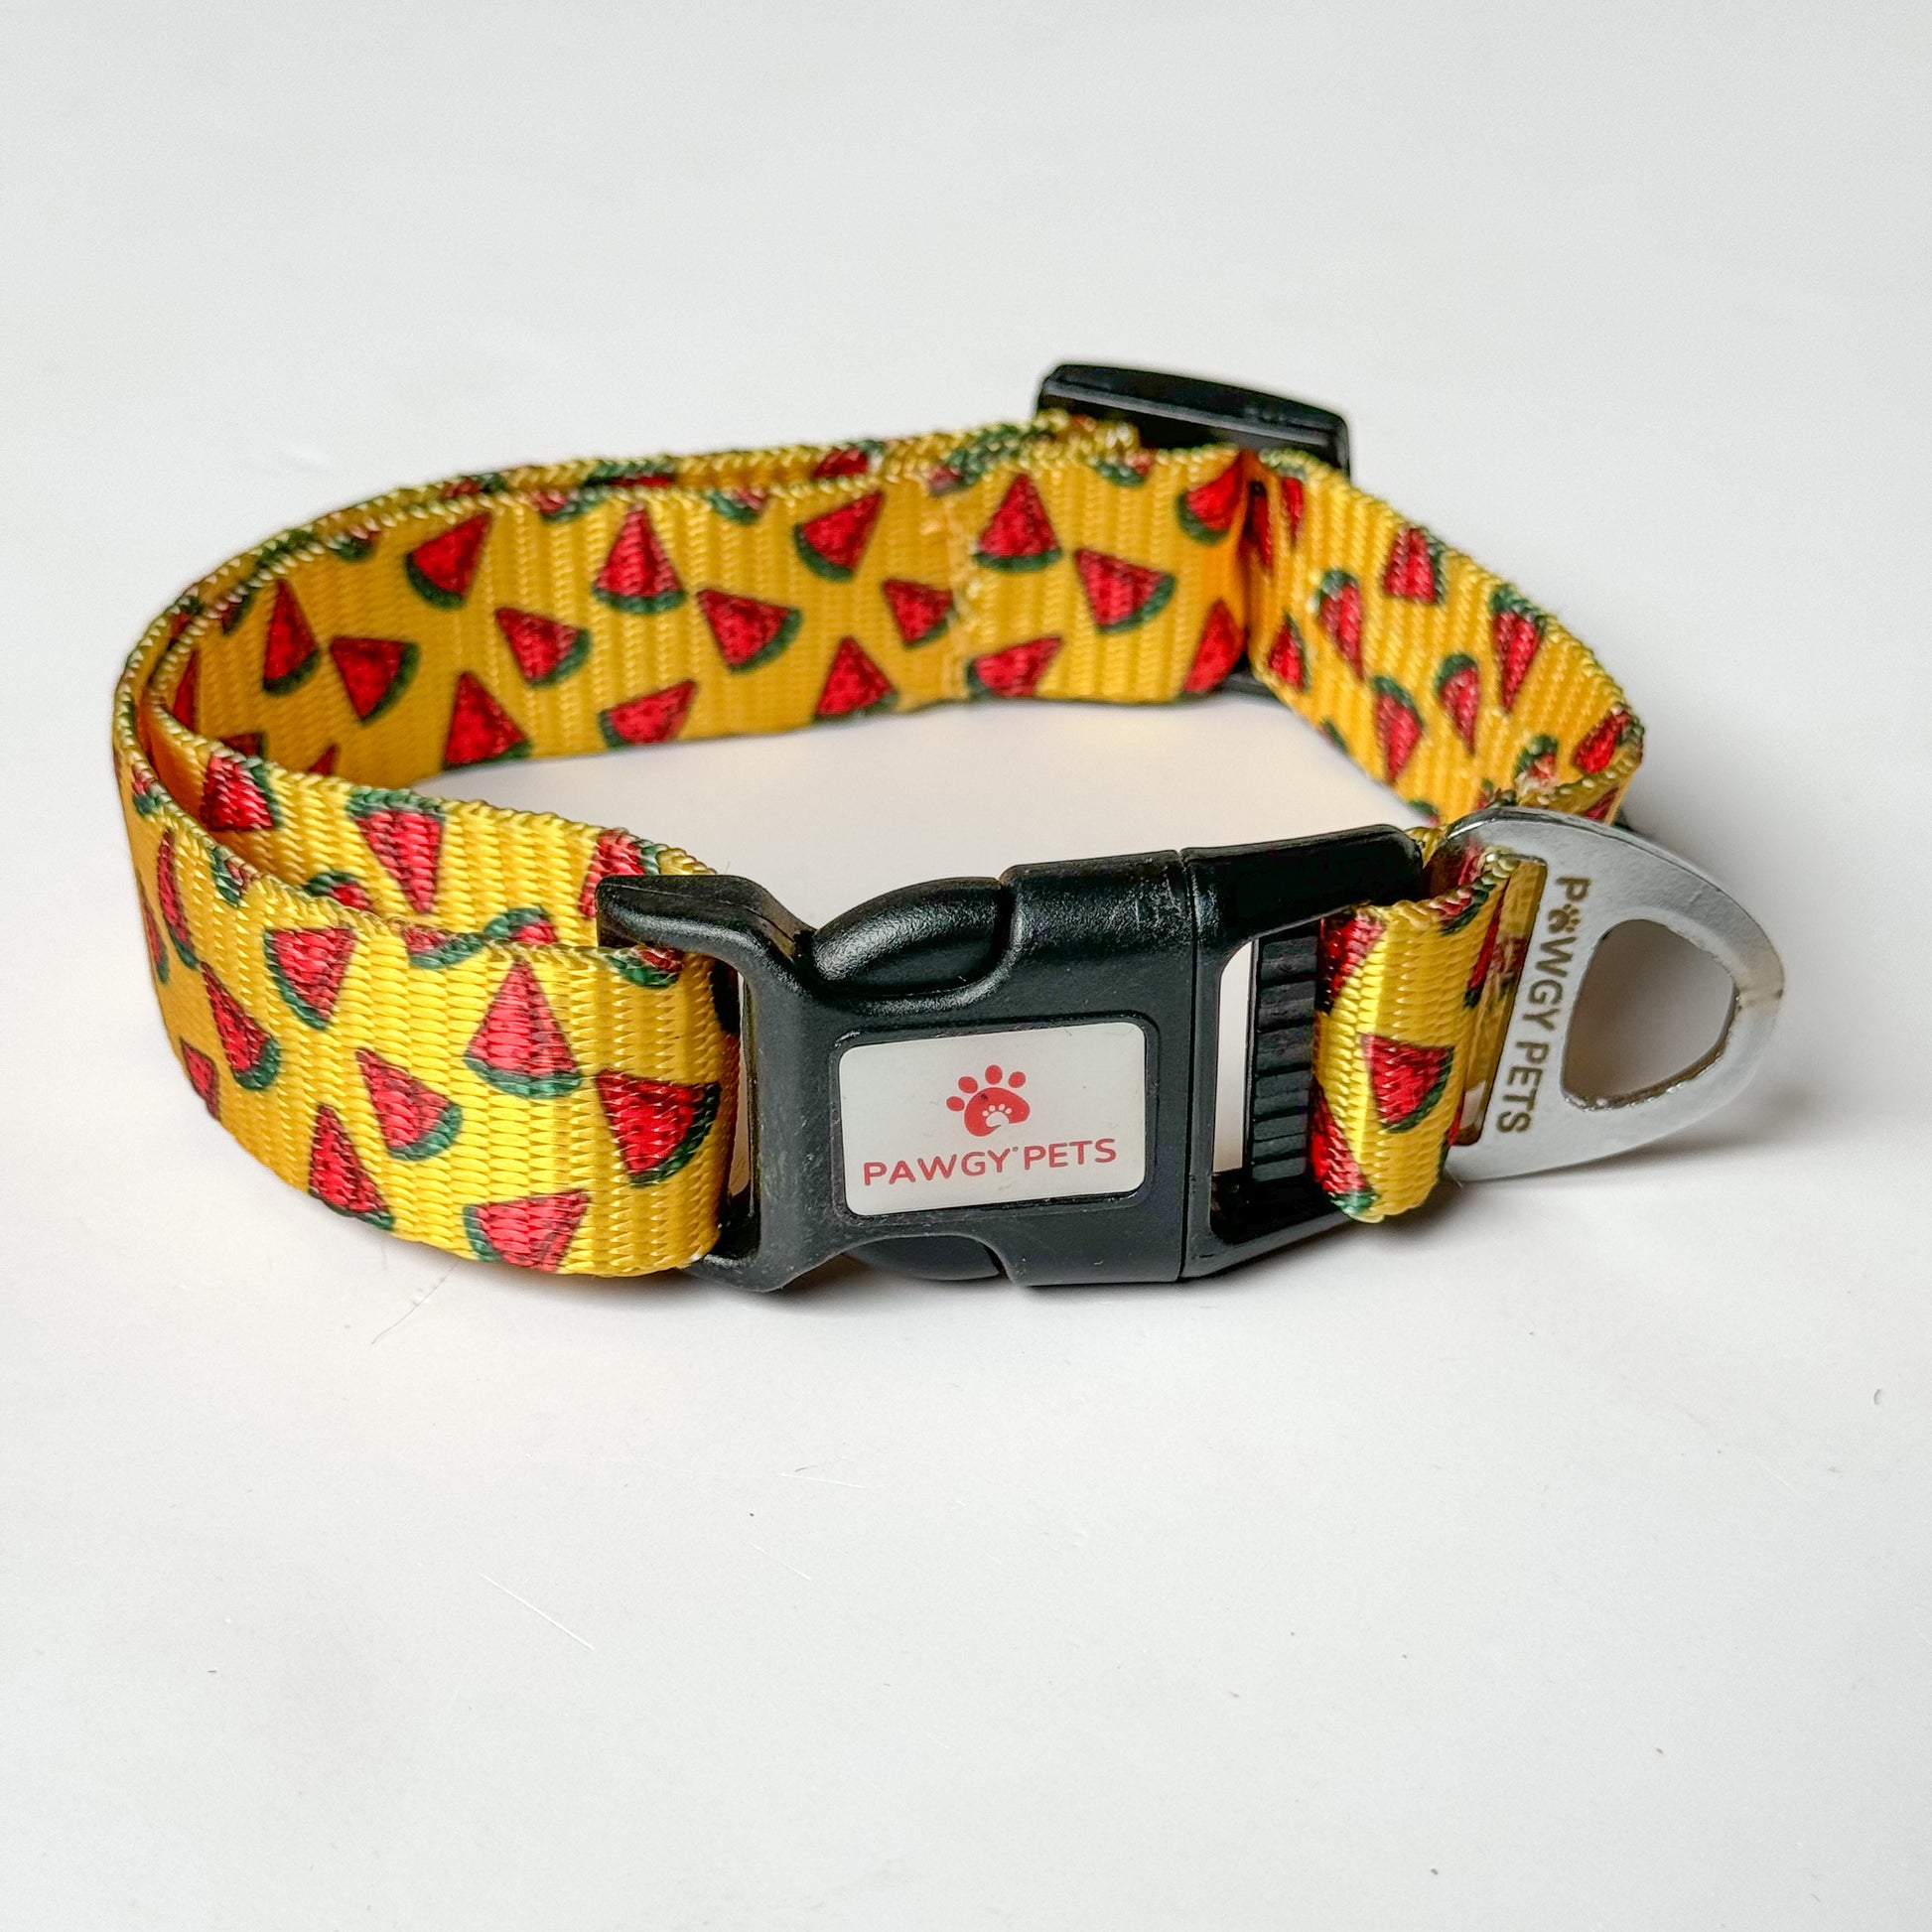 Pawgy Pets Collar Watermelon yellow for dogs and cats